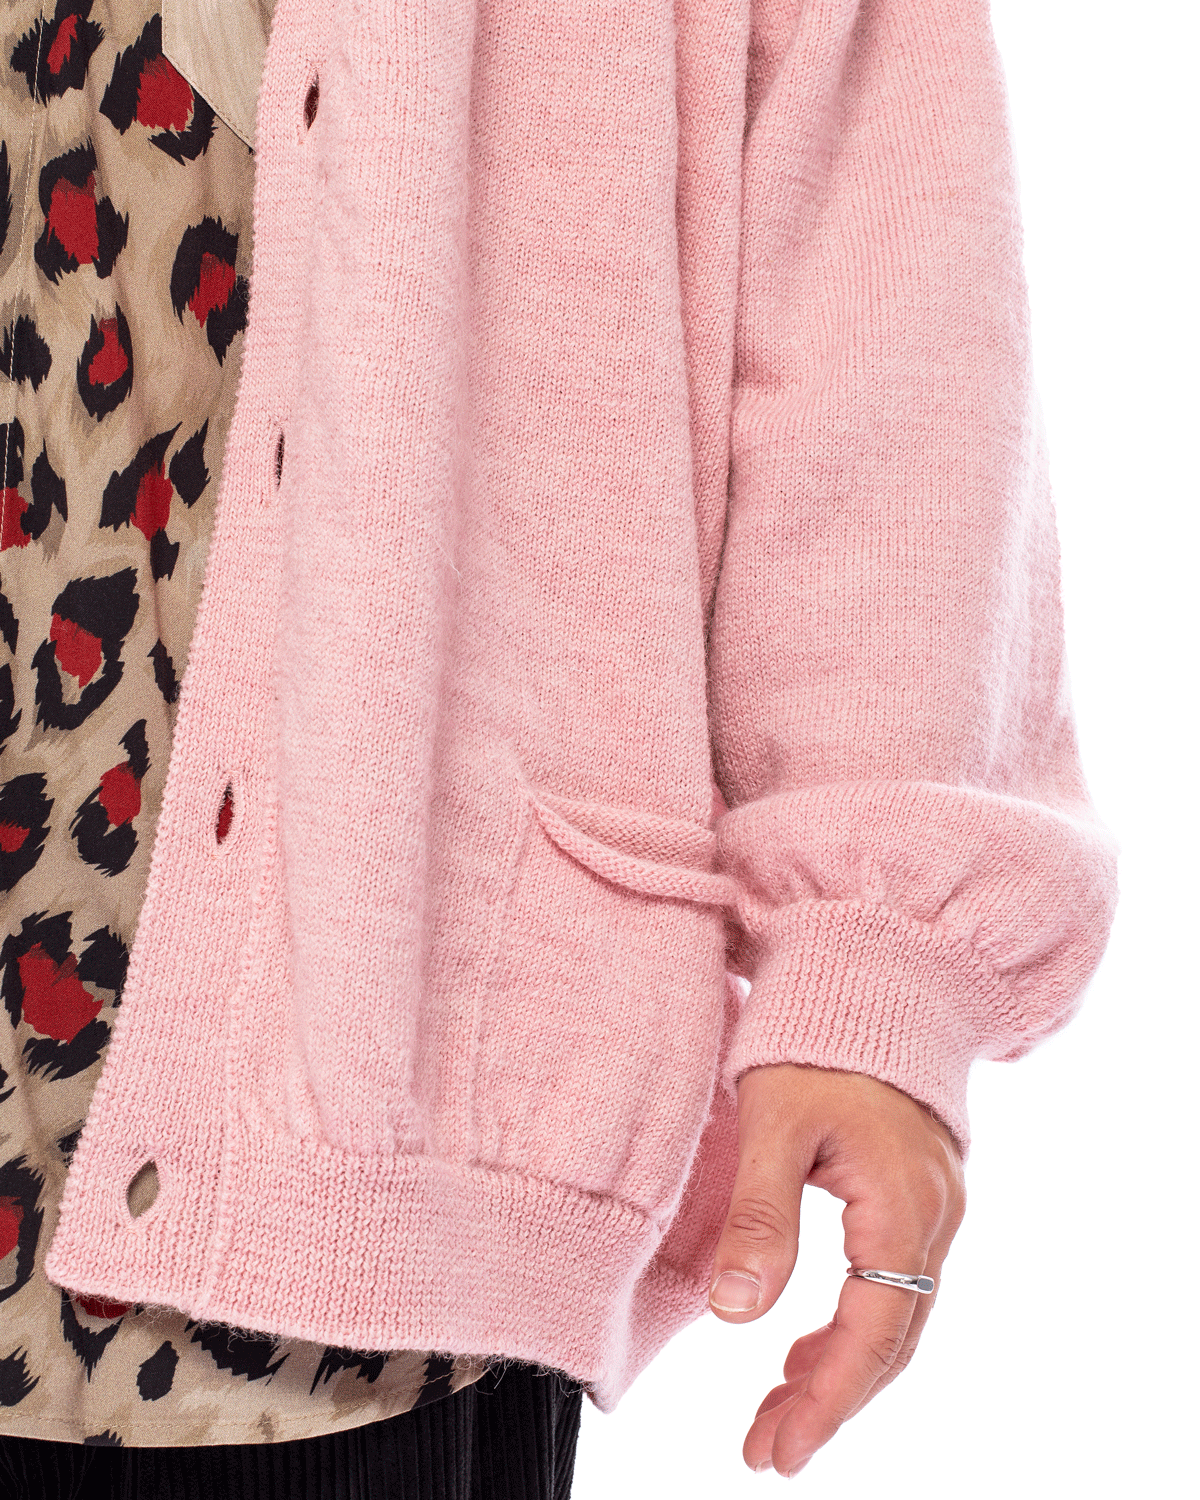 A Huge Magliano Cardigan Light Pink